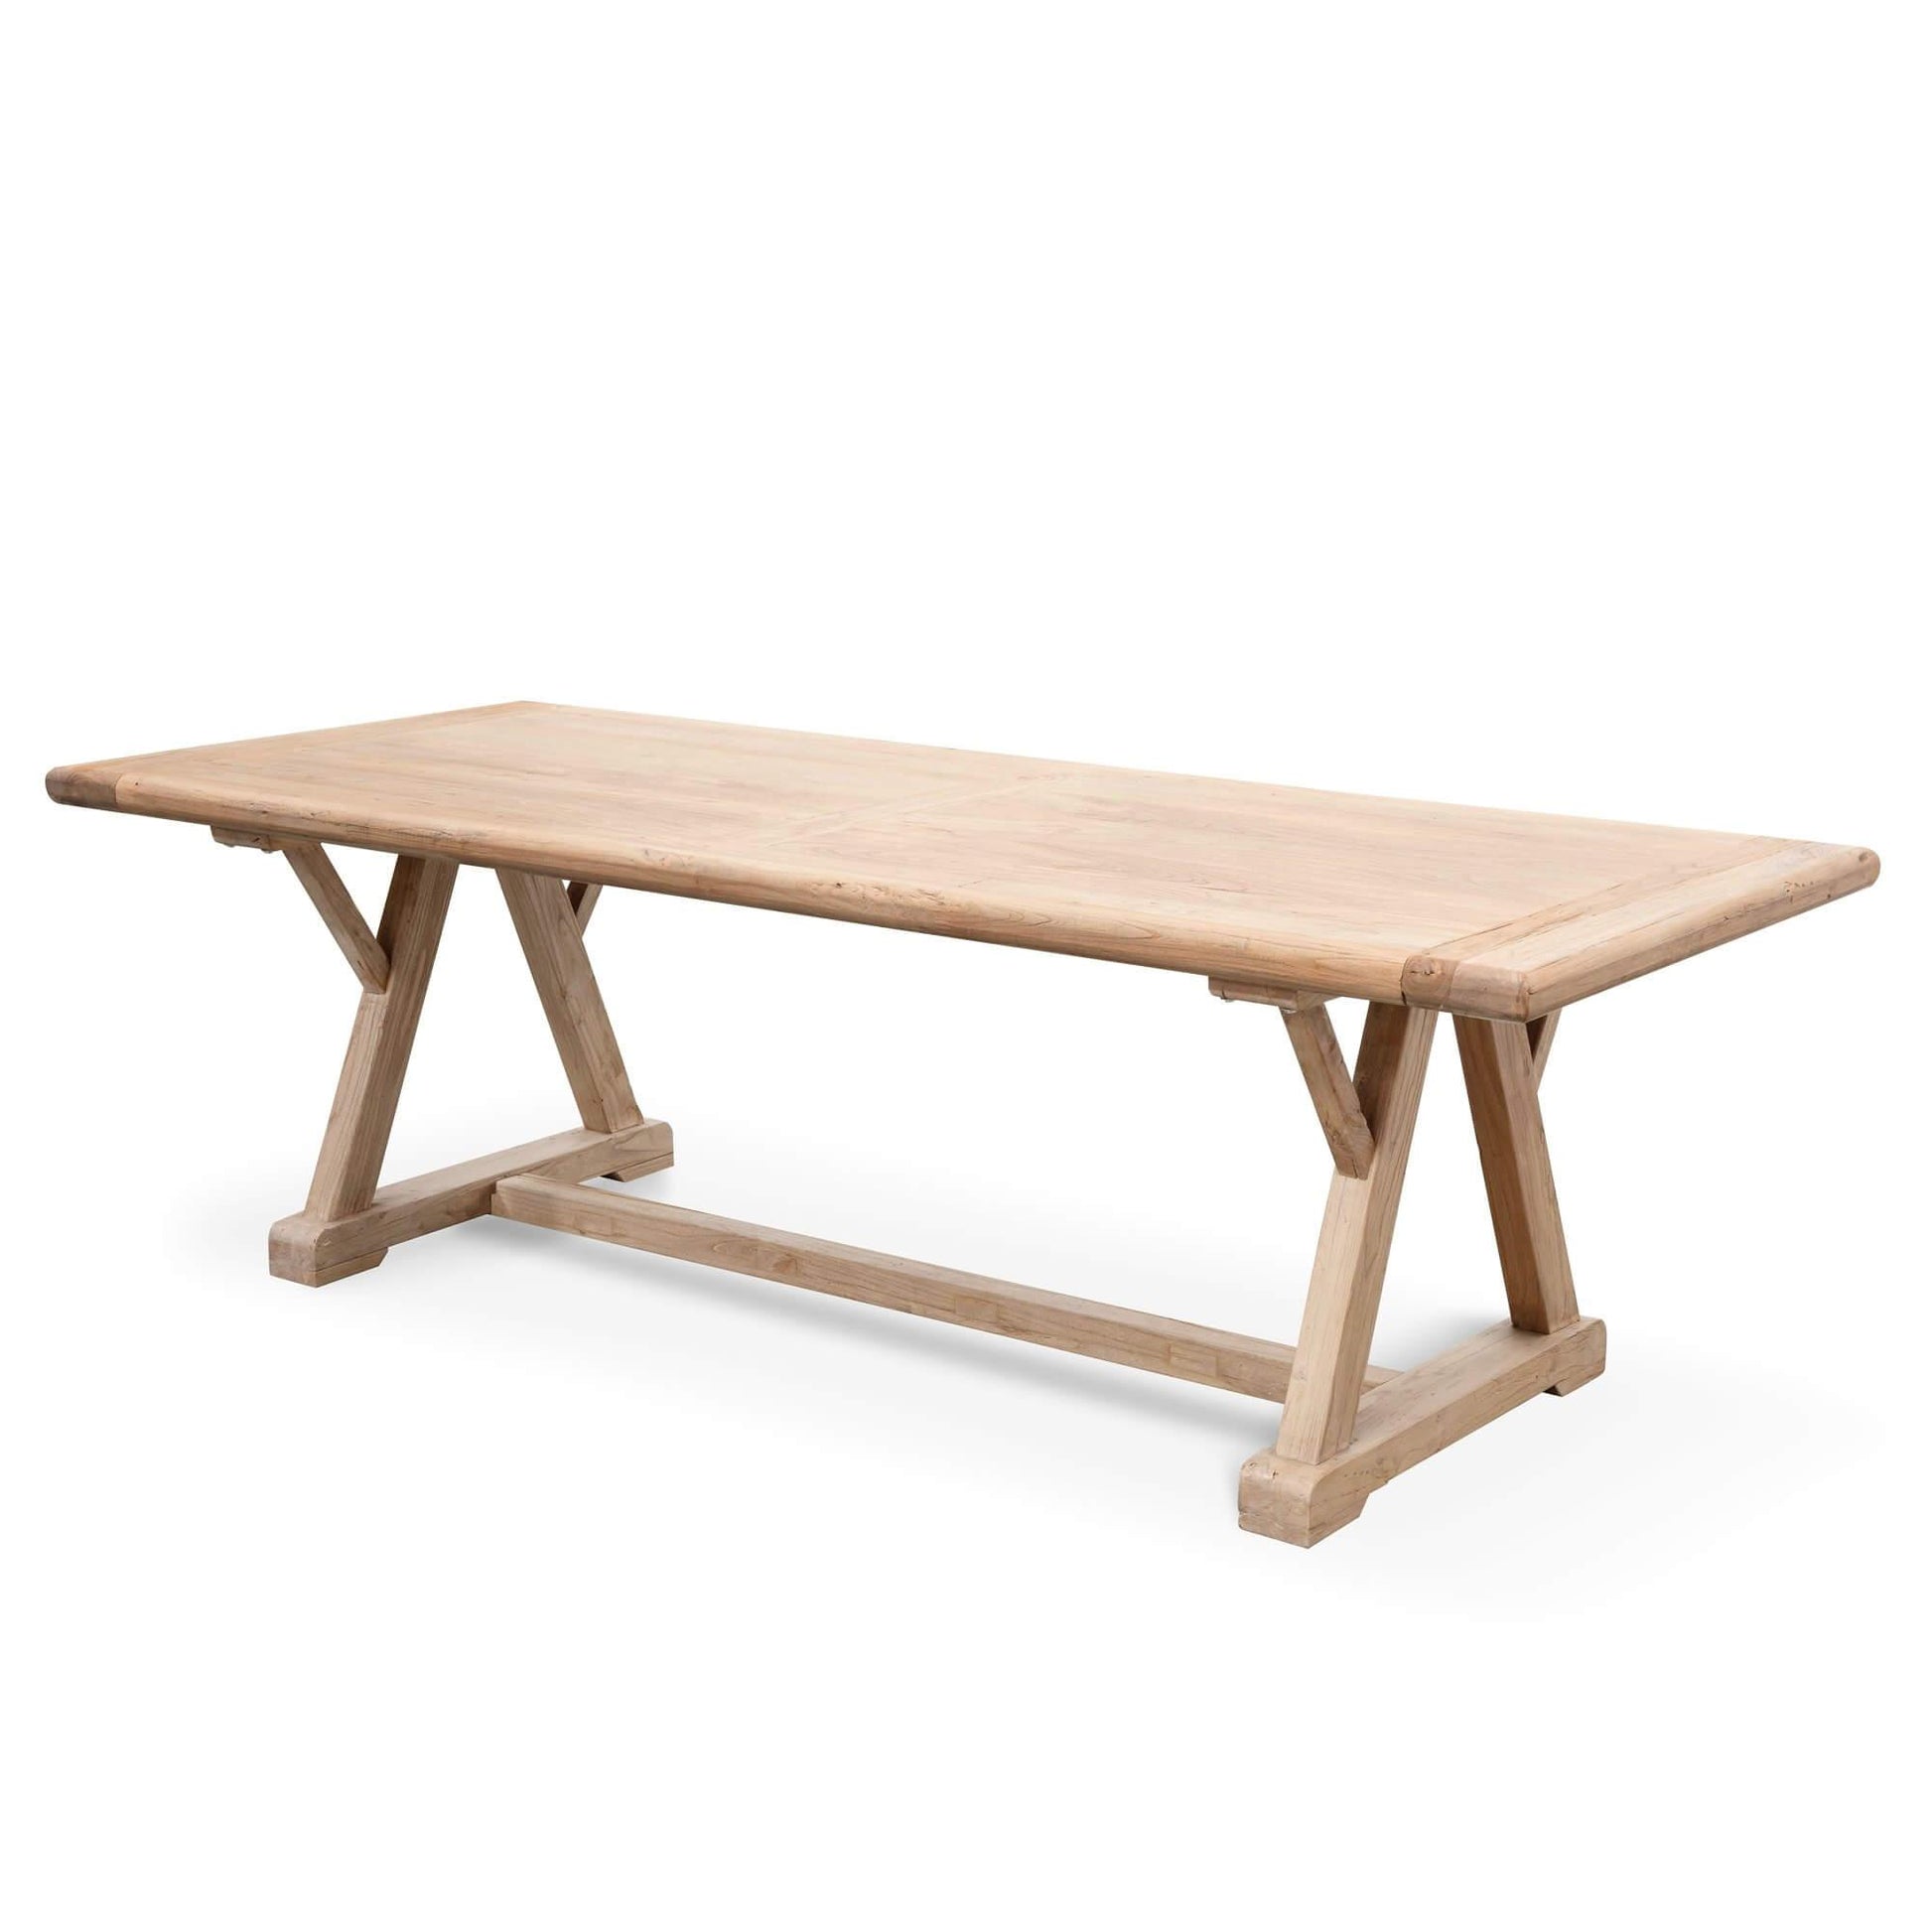 Calibre Reclaimed Elm Wood 2.4m Dining Table DT2576-Dining Tables-Calibre-Prime Furniture